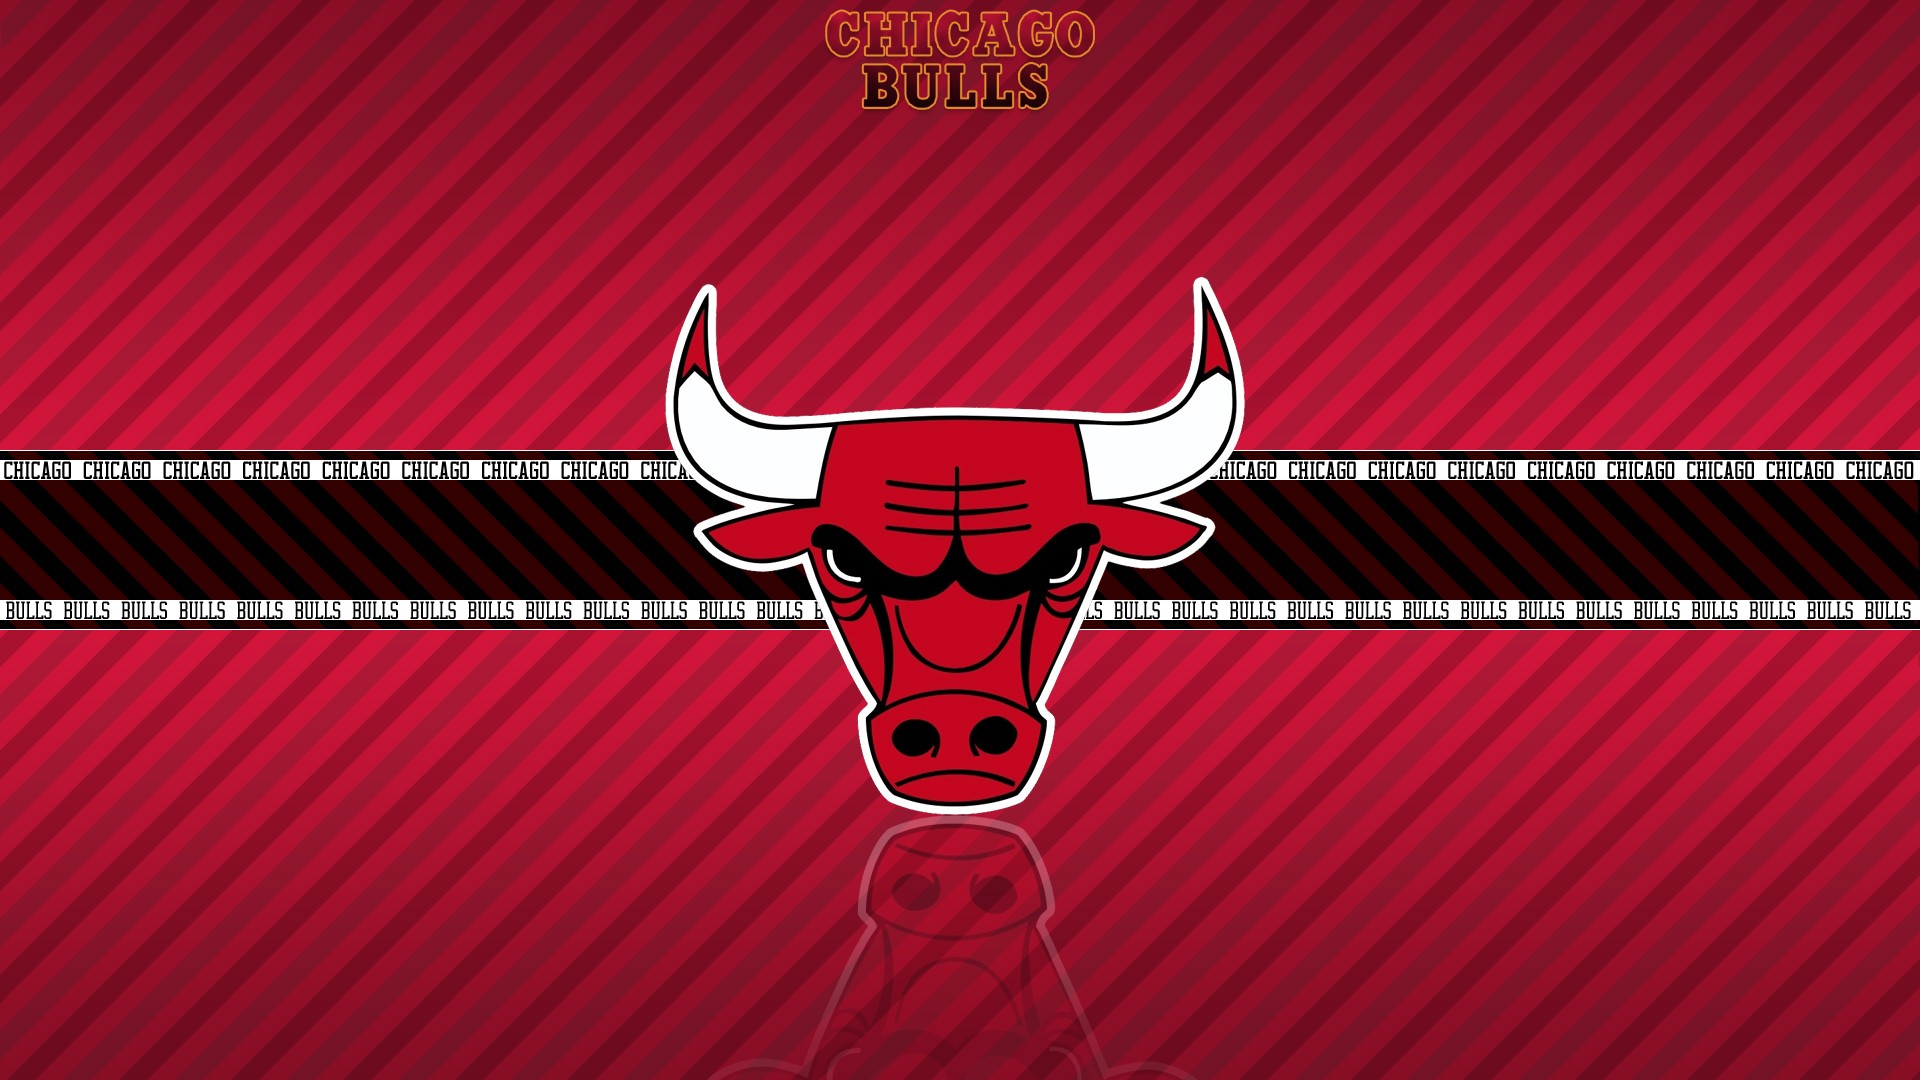 Chicago Bulls wallpaper HD background download Facebook Covers ...